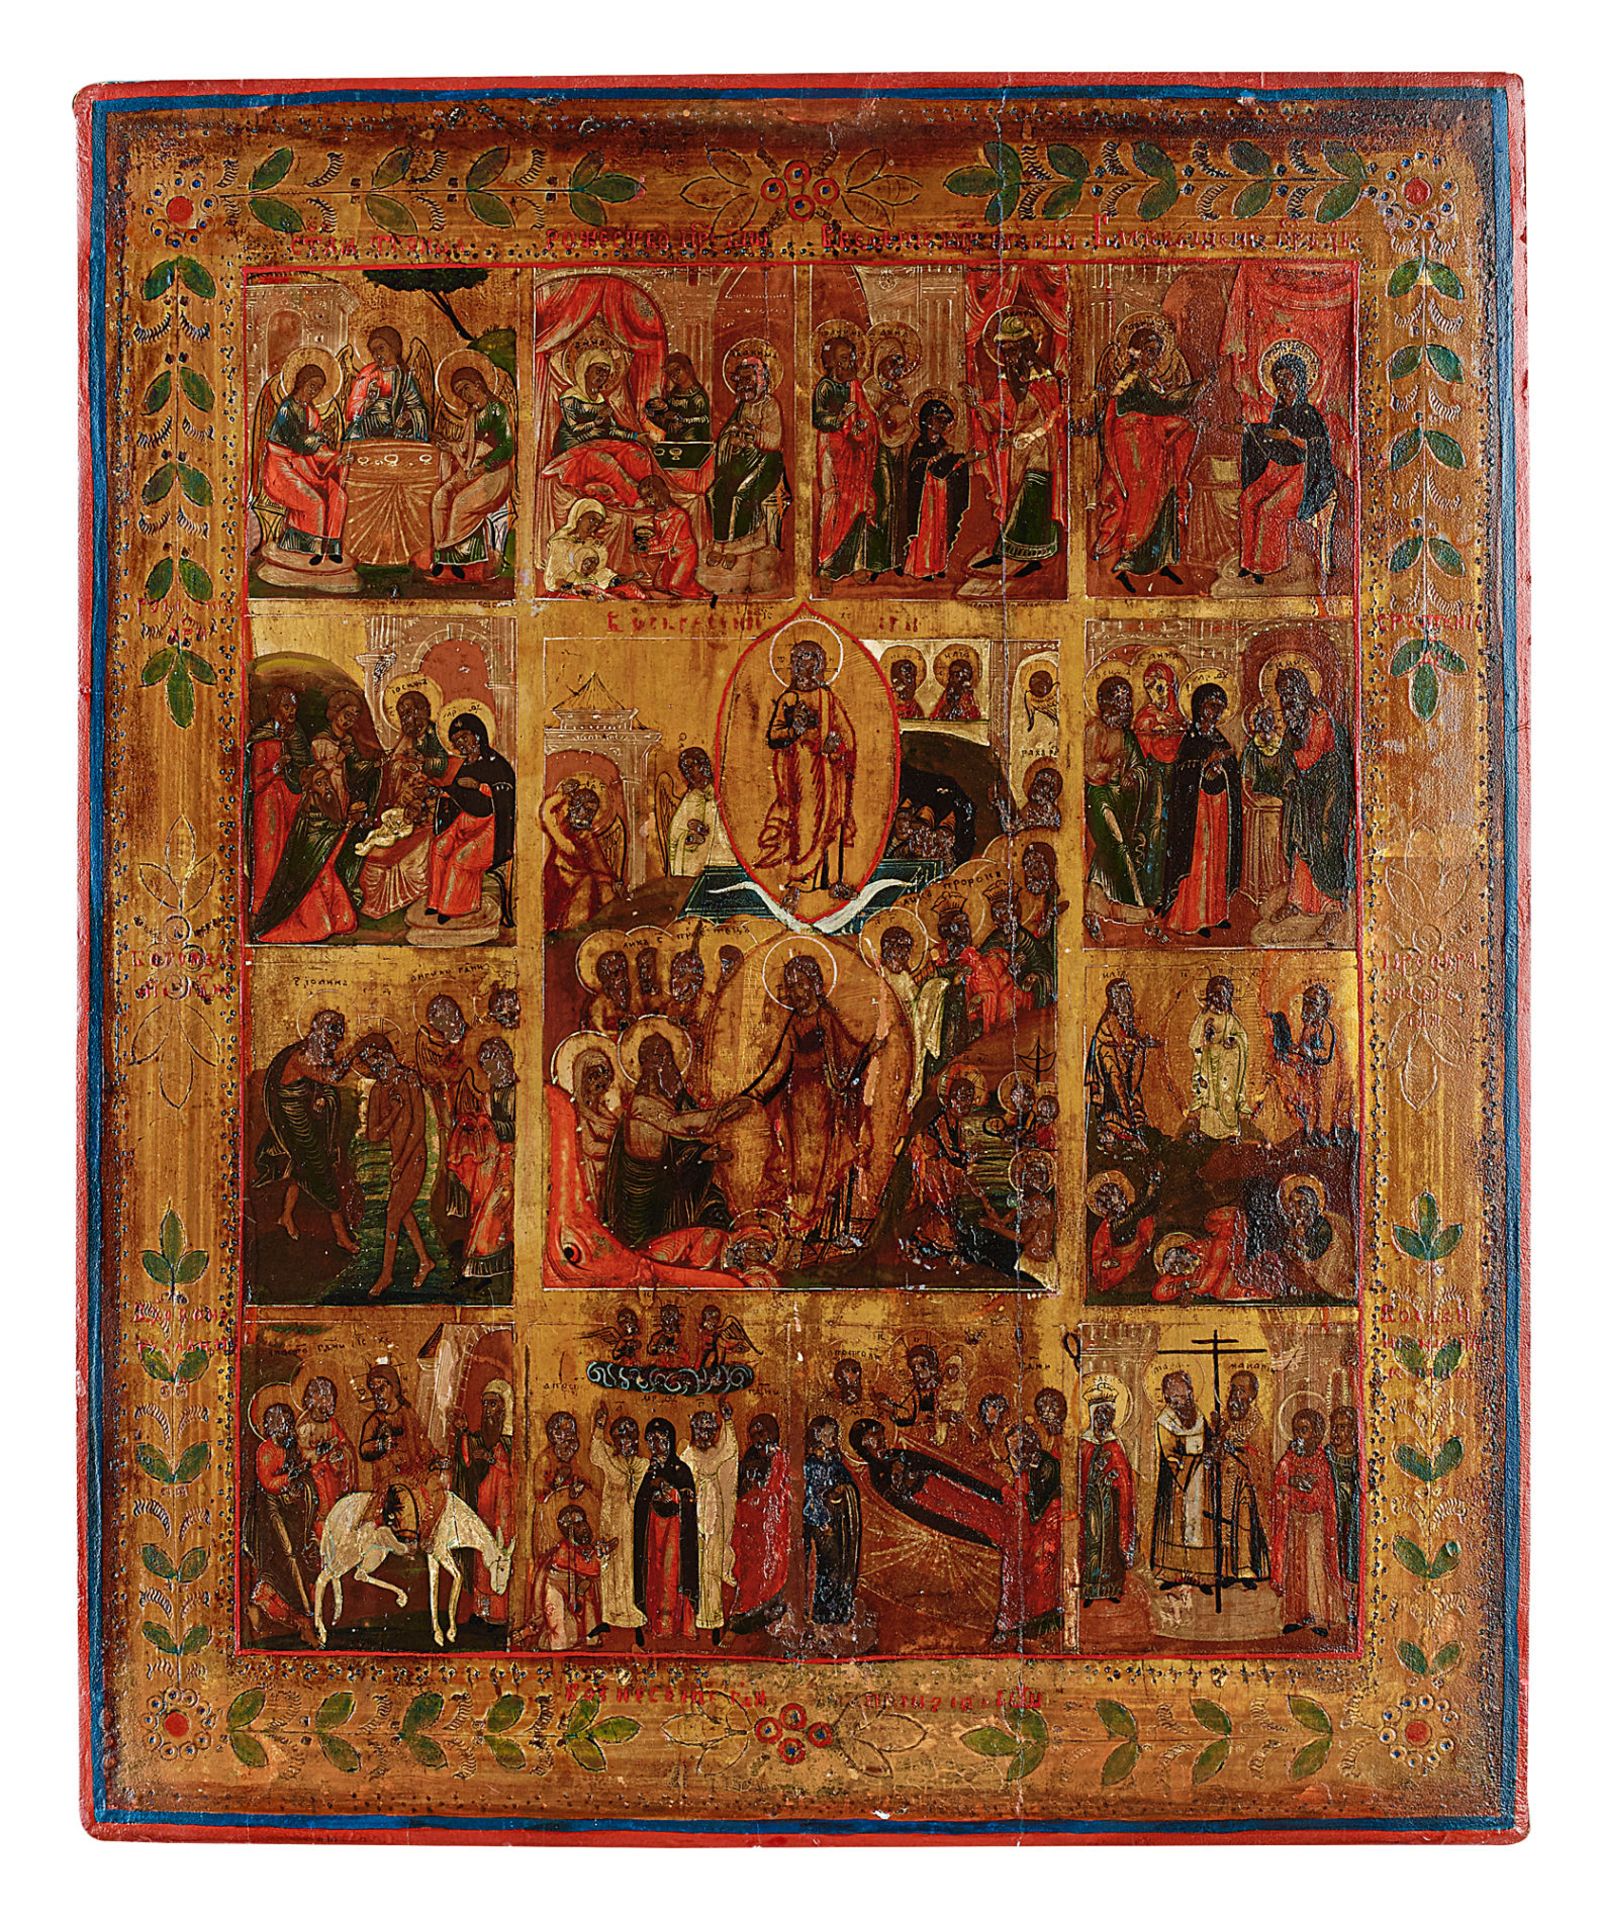 Icon depicting the resurrection of Christ and the twelve great feasts of the Orthodox Church year